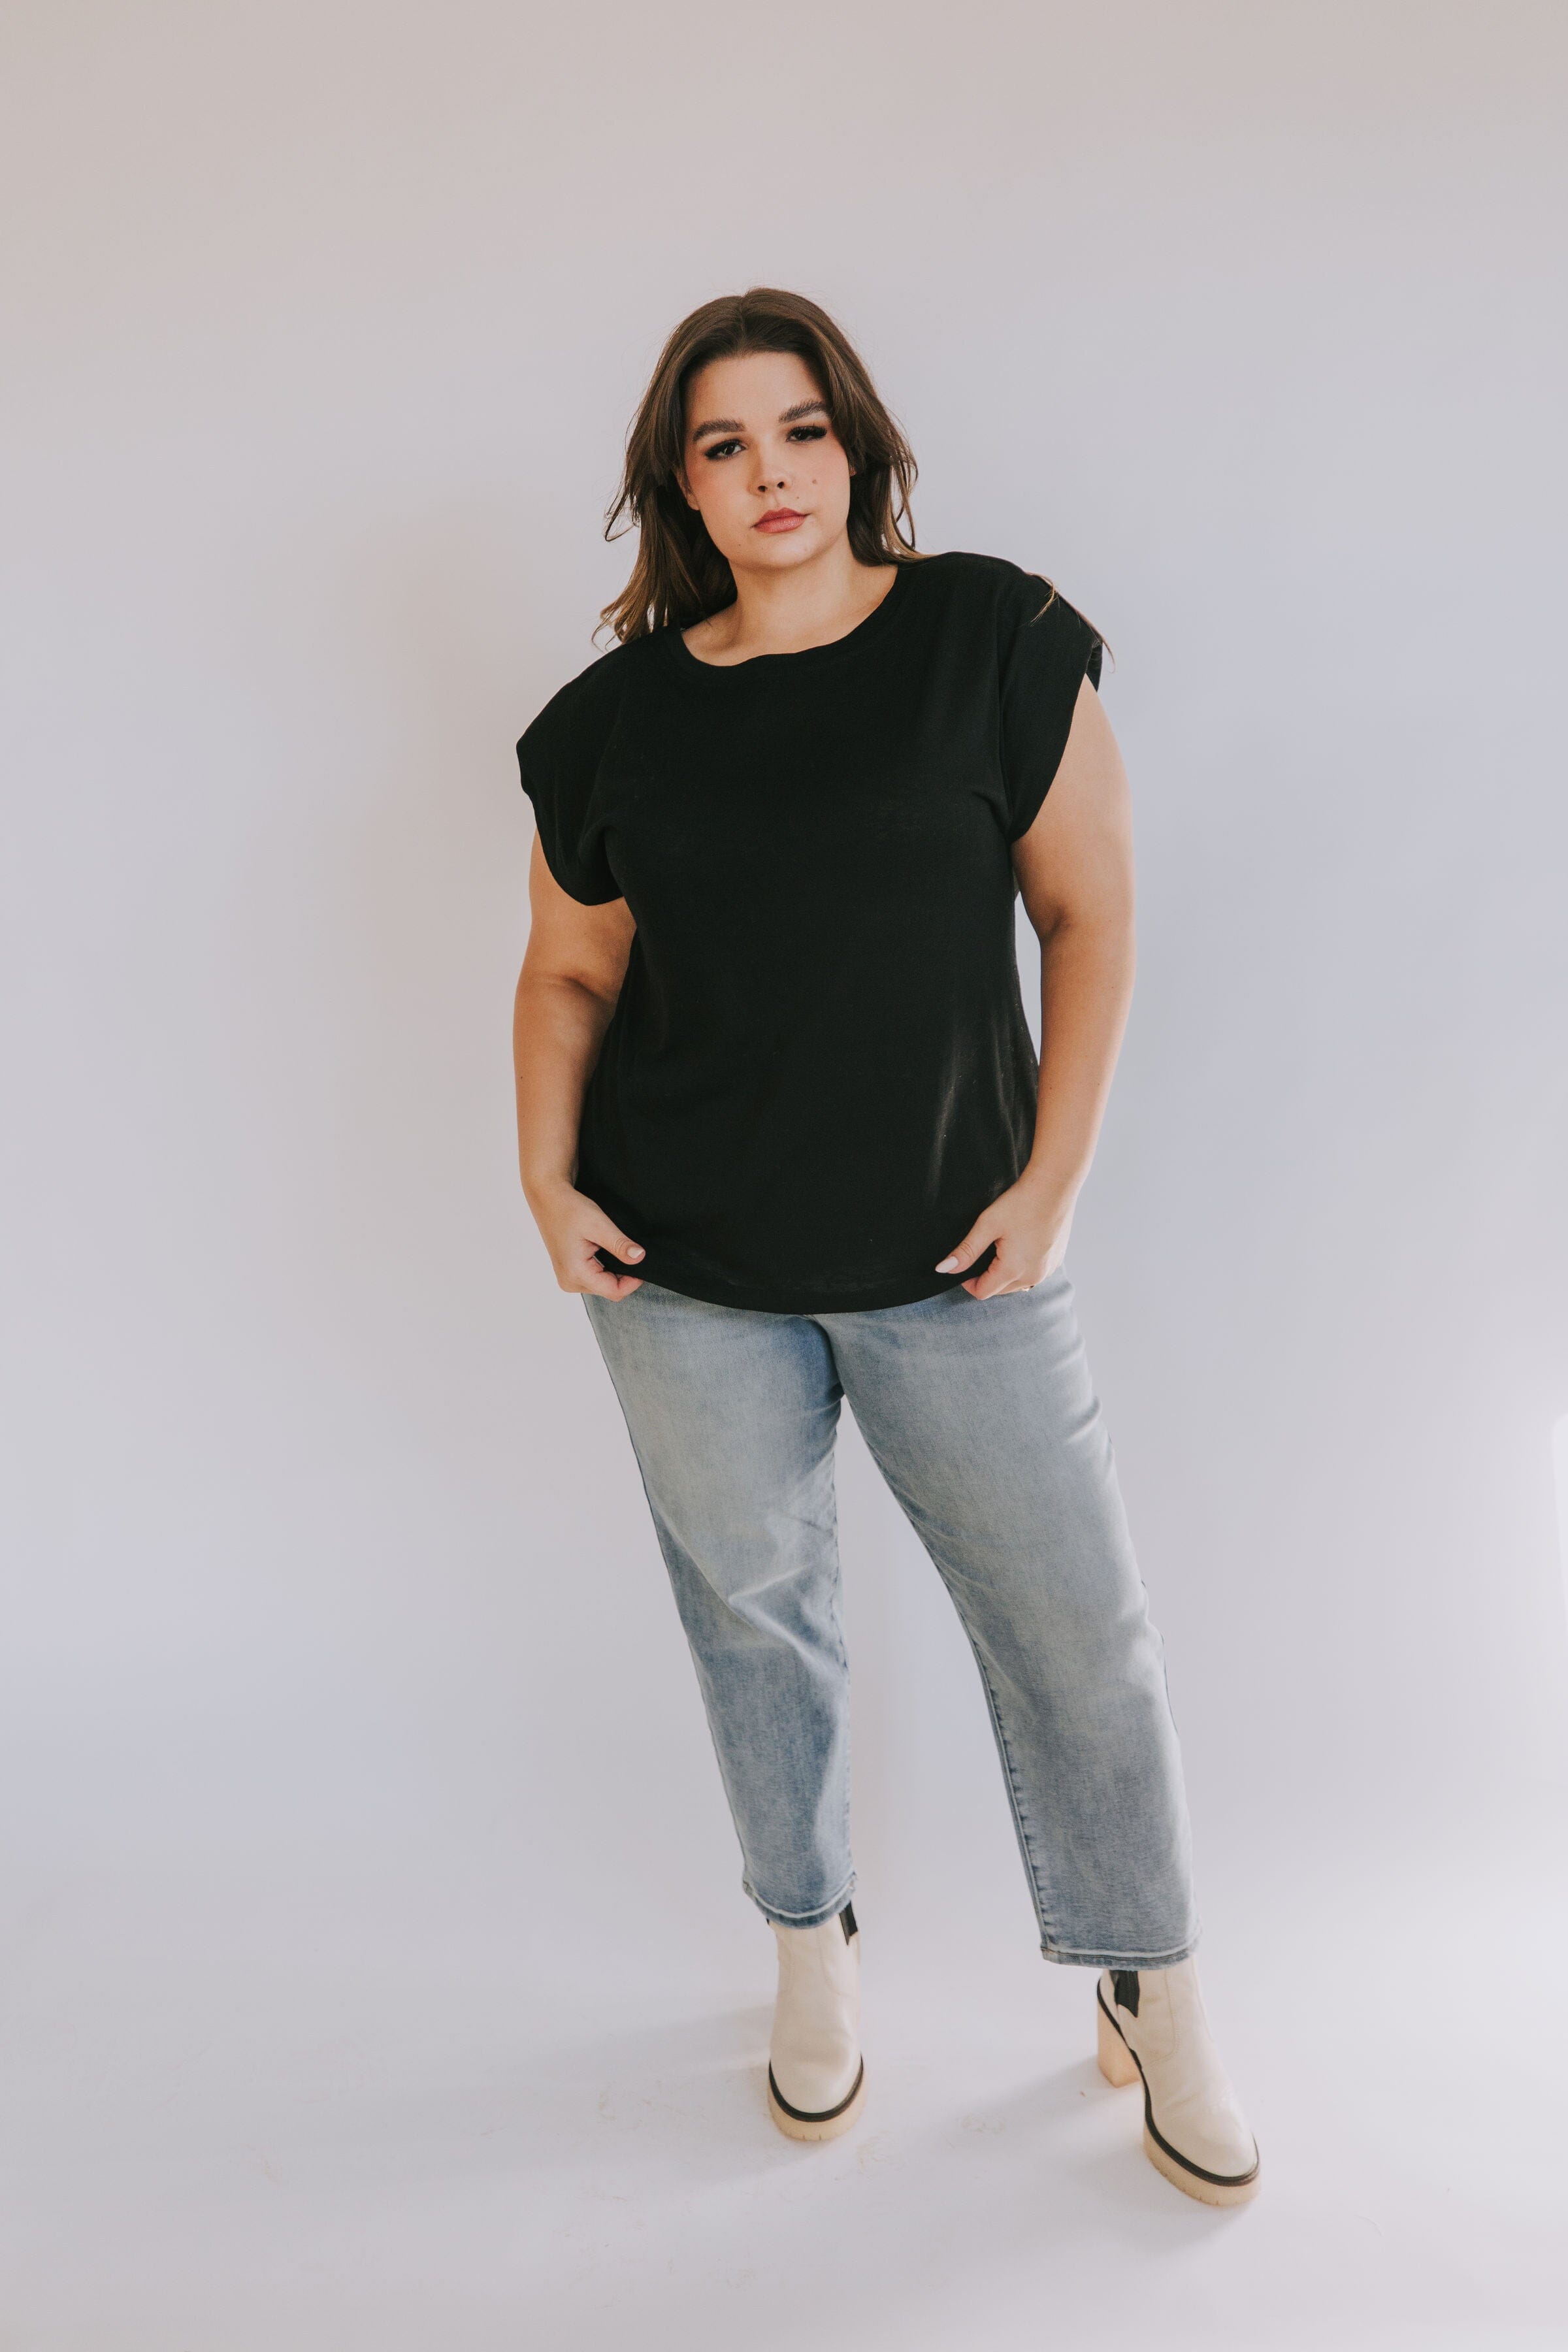 PLUS SIZE - Strong Woman Top